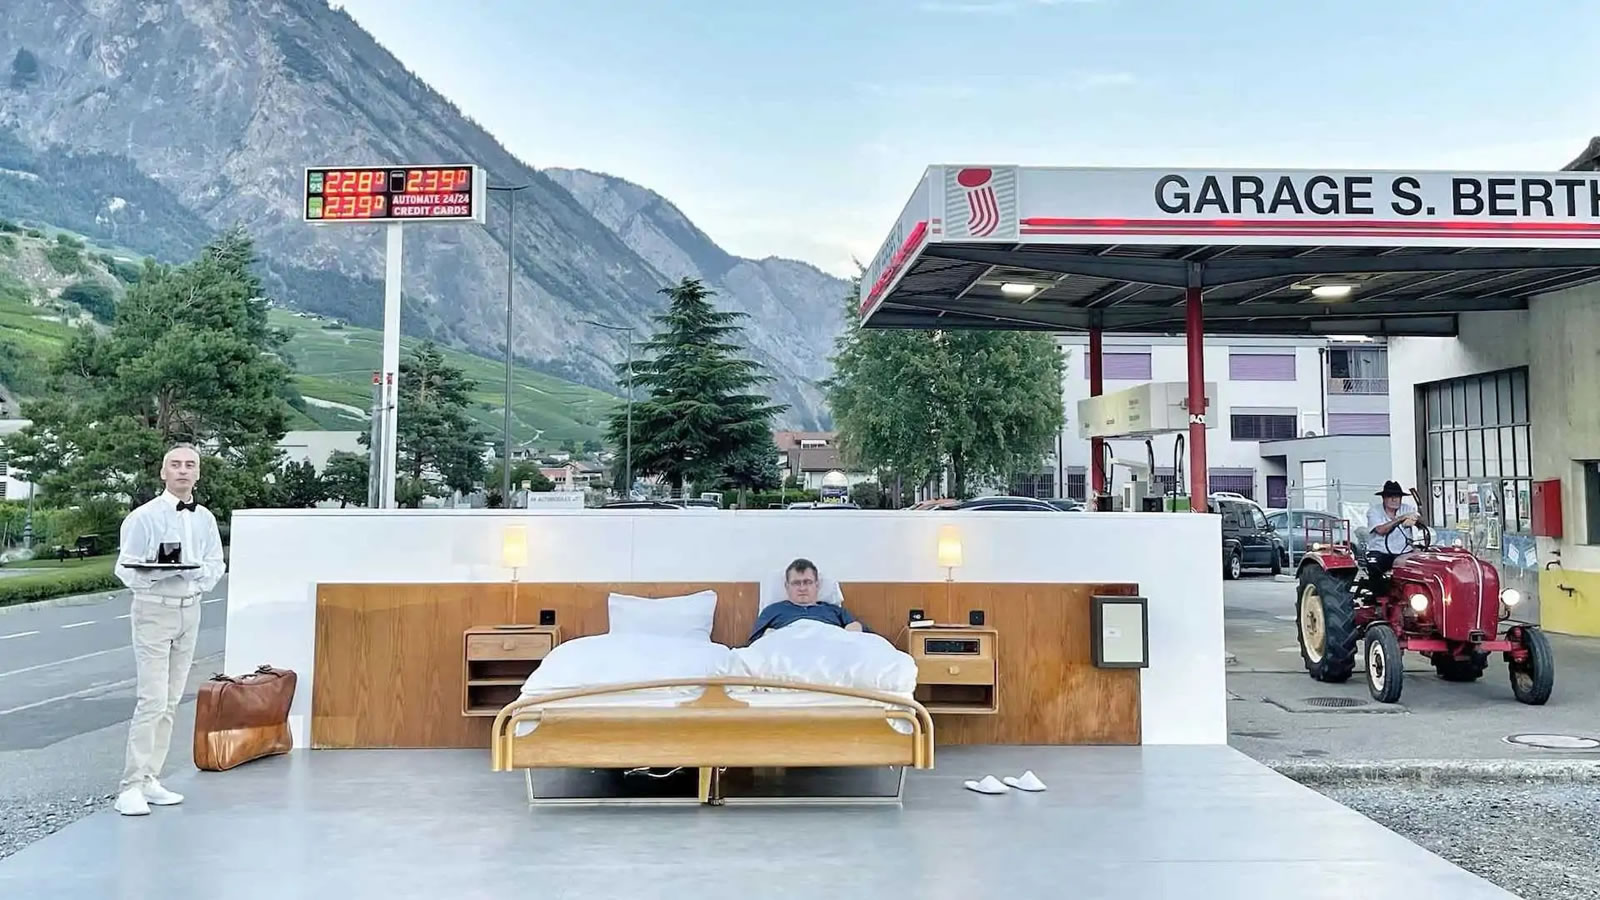 Bizarre! This Swiss Company has introduced a zero-star suite at a gas station